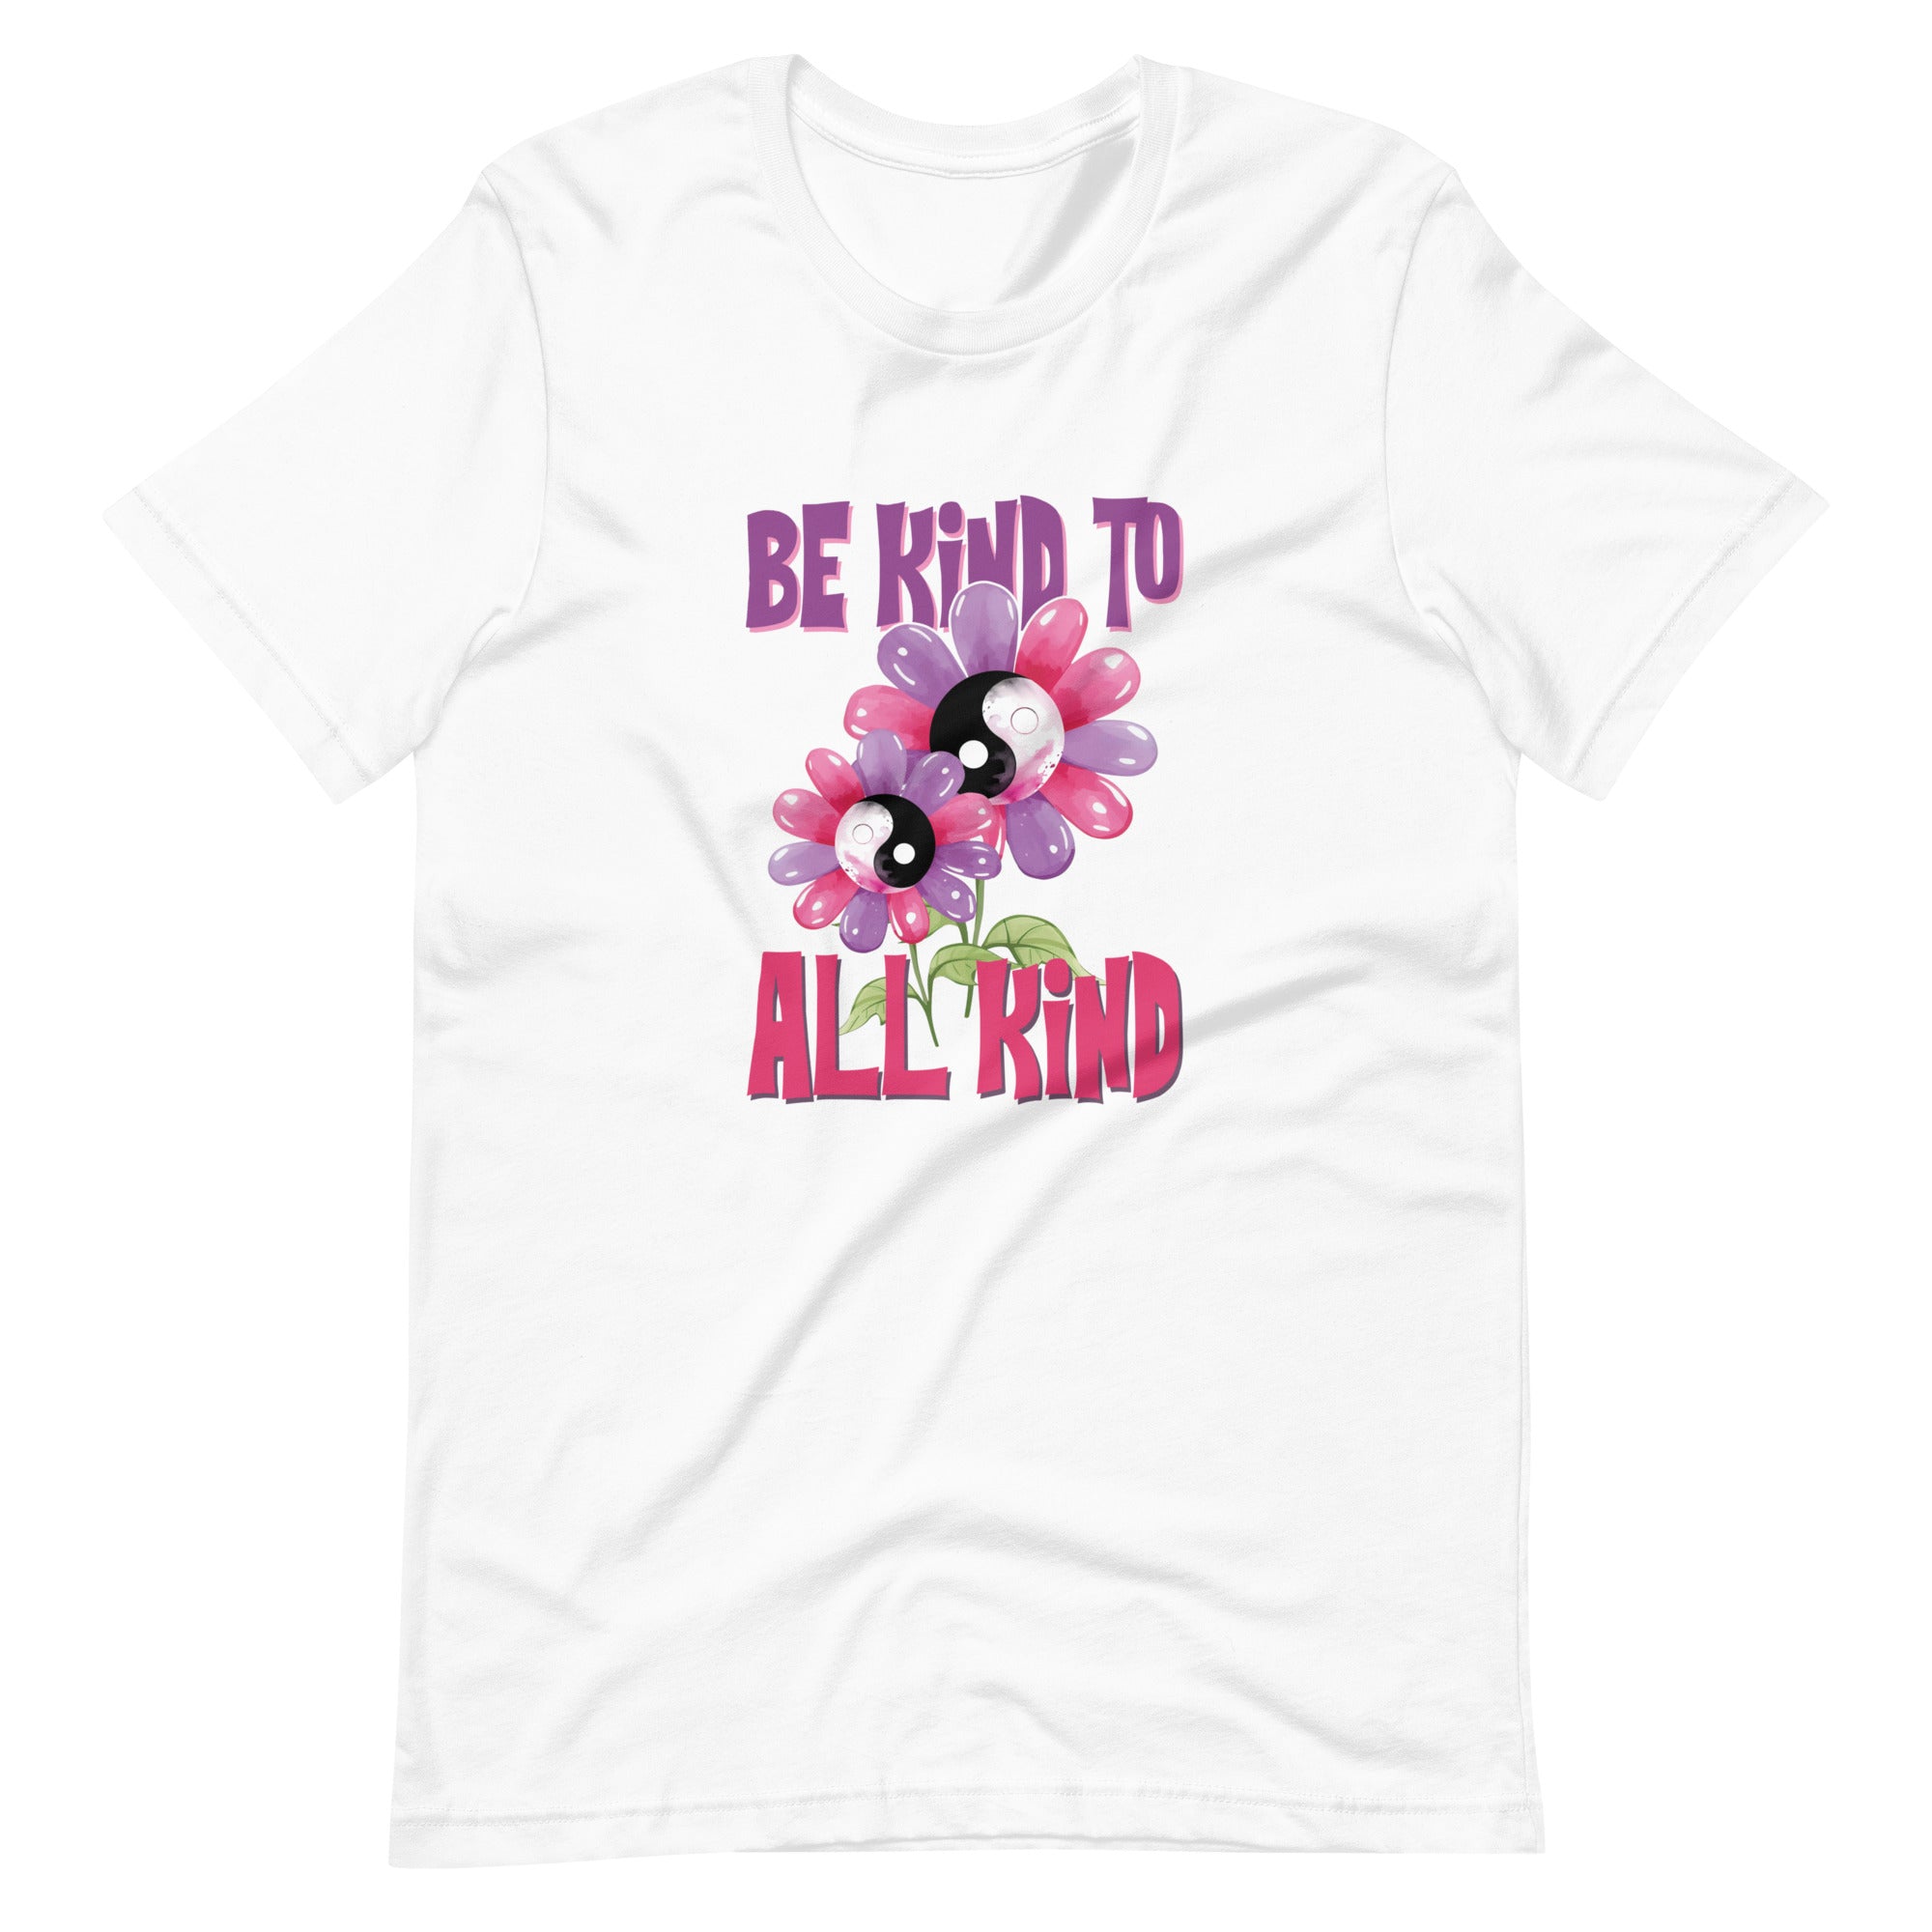 Be Kind To All Kind Unisex t-shirt